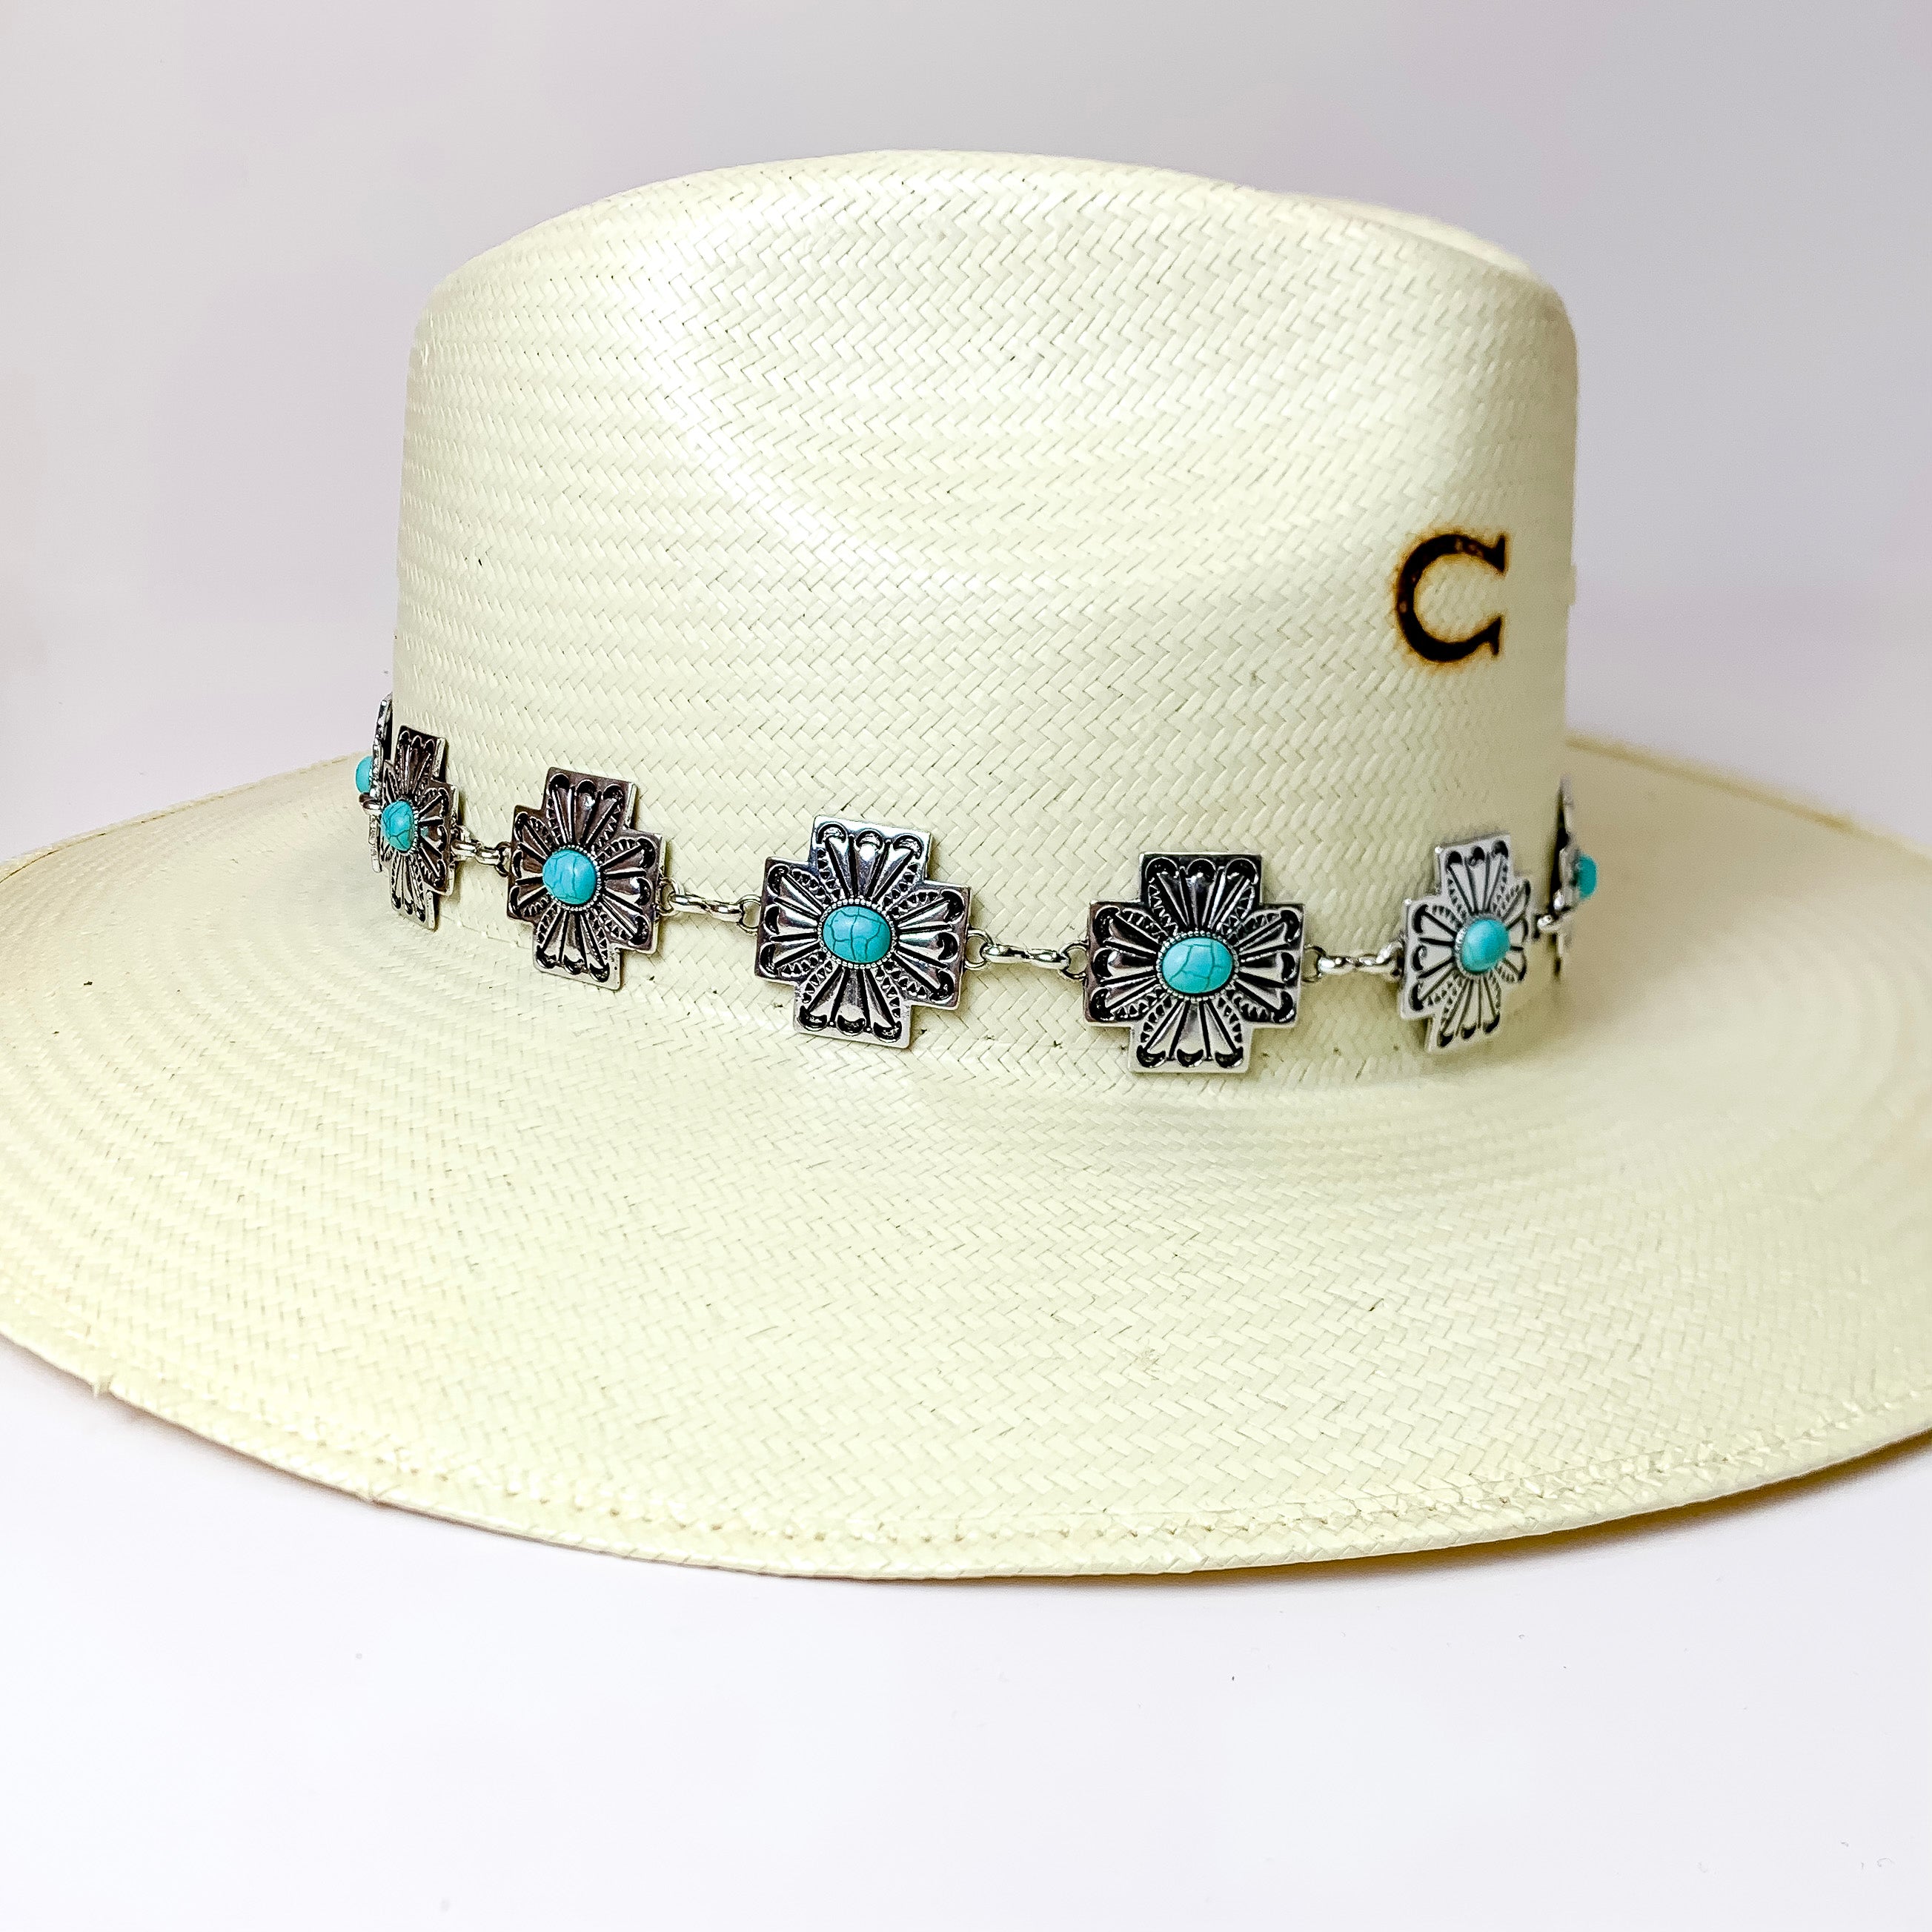 Silver Tone Cross Design Hat Band with Faux Turquoise Accents - Giddy Up Glamour Boutique